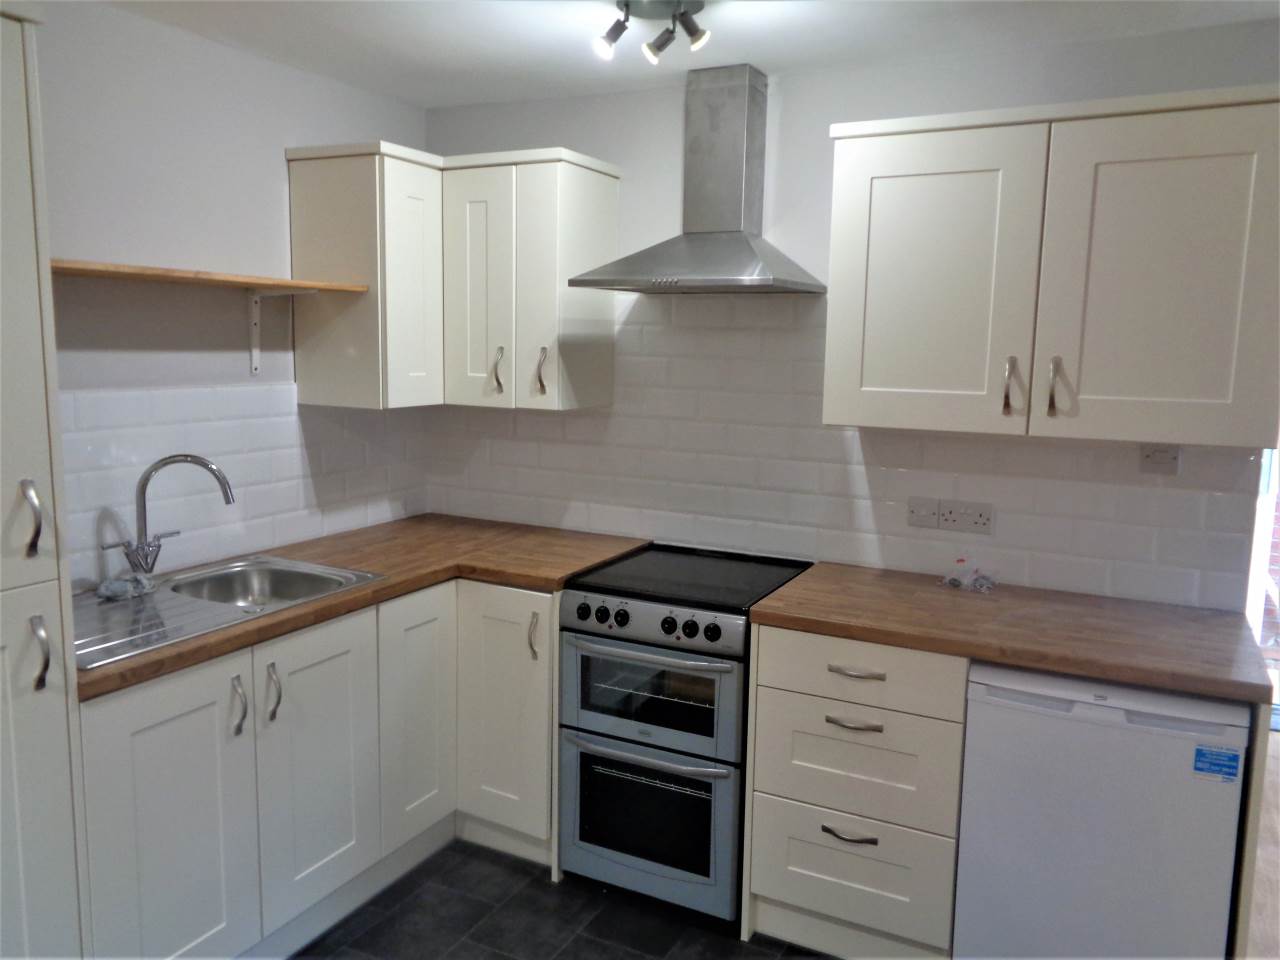 0 bed Room for rent in Filton. From Property Wise